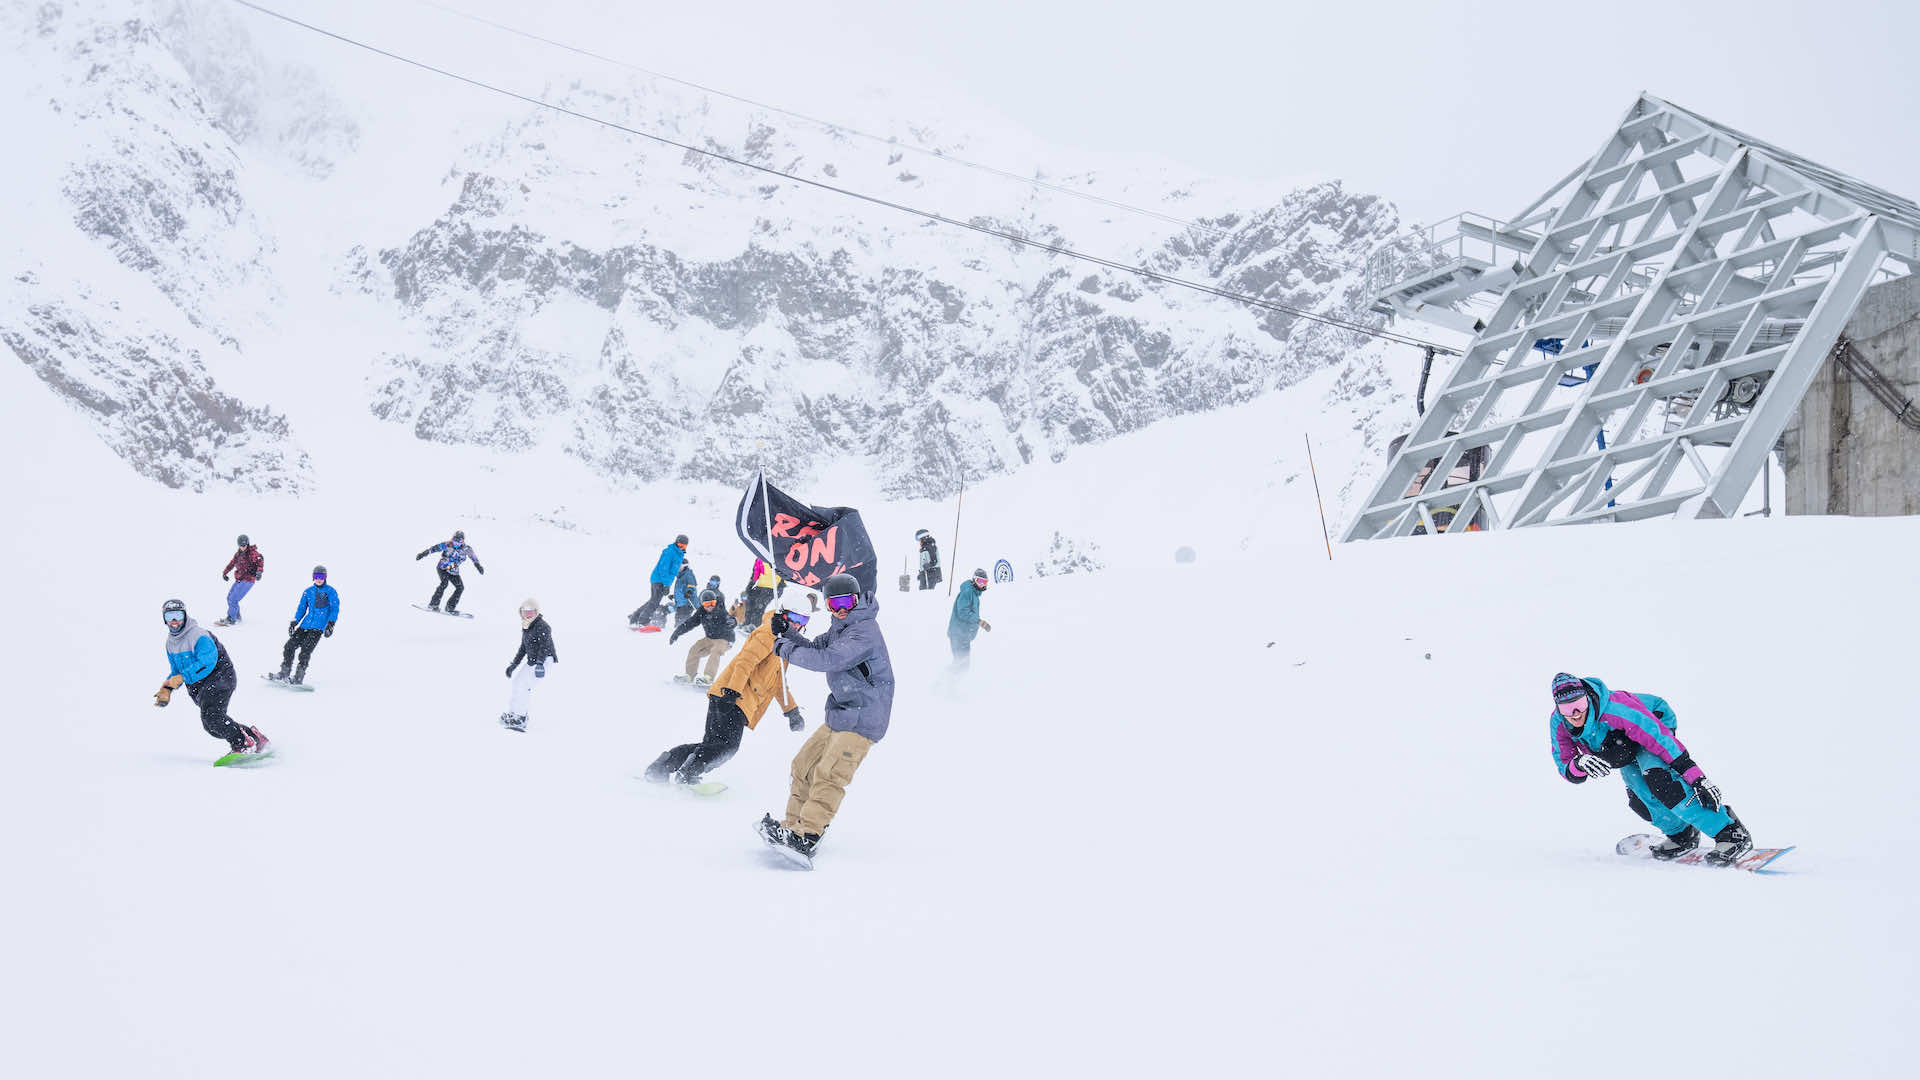 A group of snowboarders with one carrying a flag